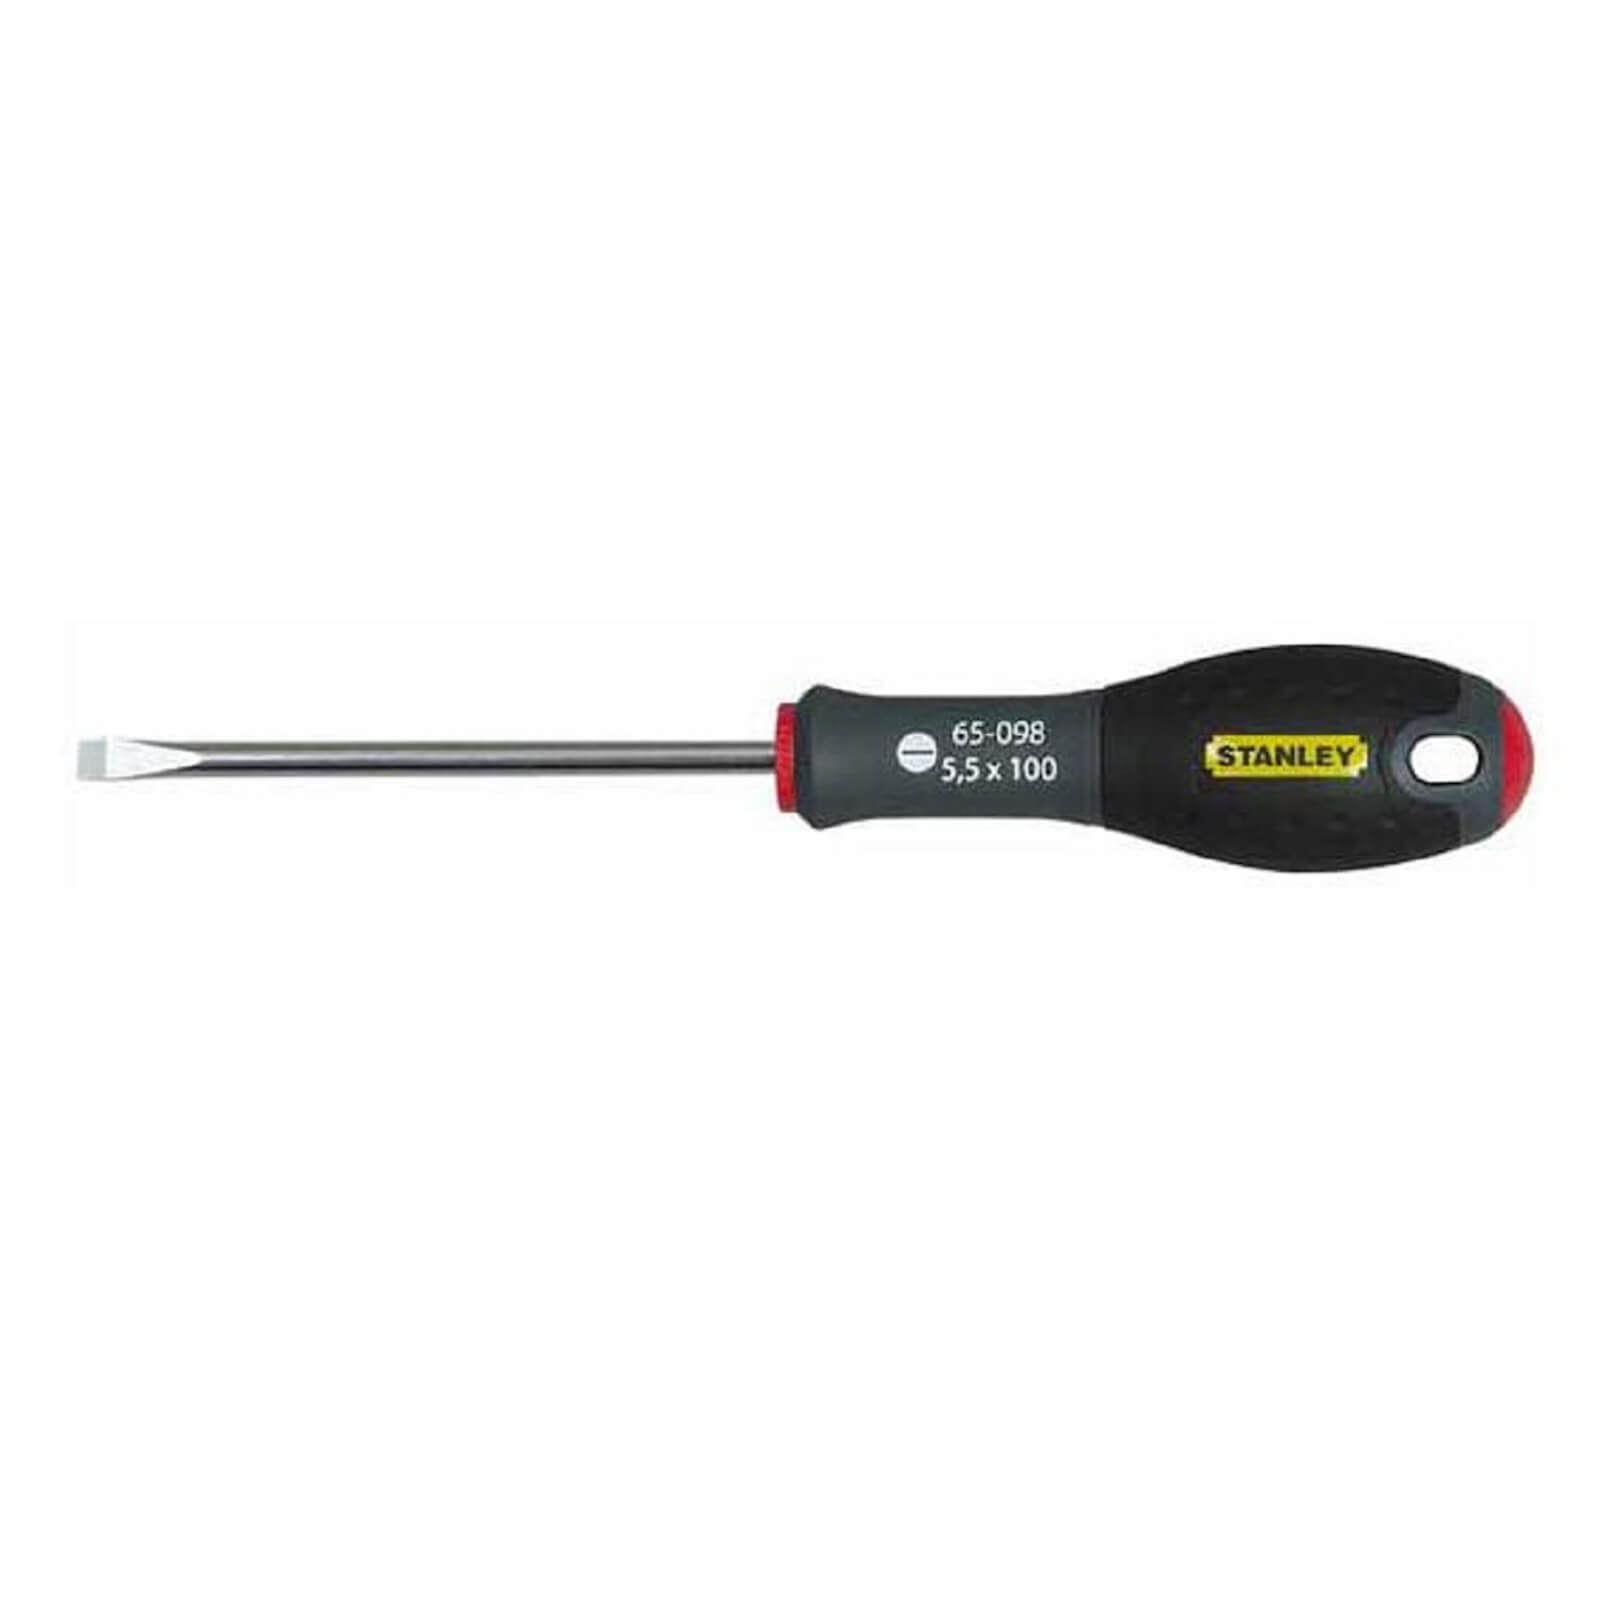 Photo of Stanley Fatmax Flared Screwdriver - 5.5x100mm